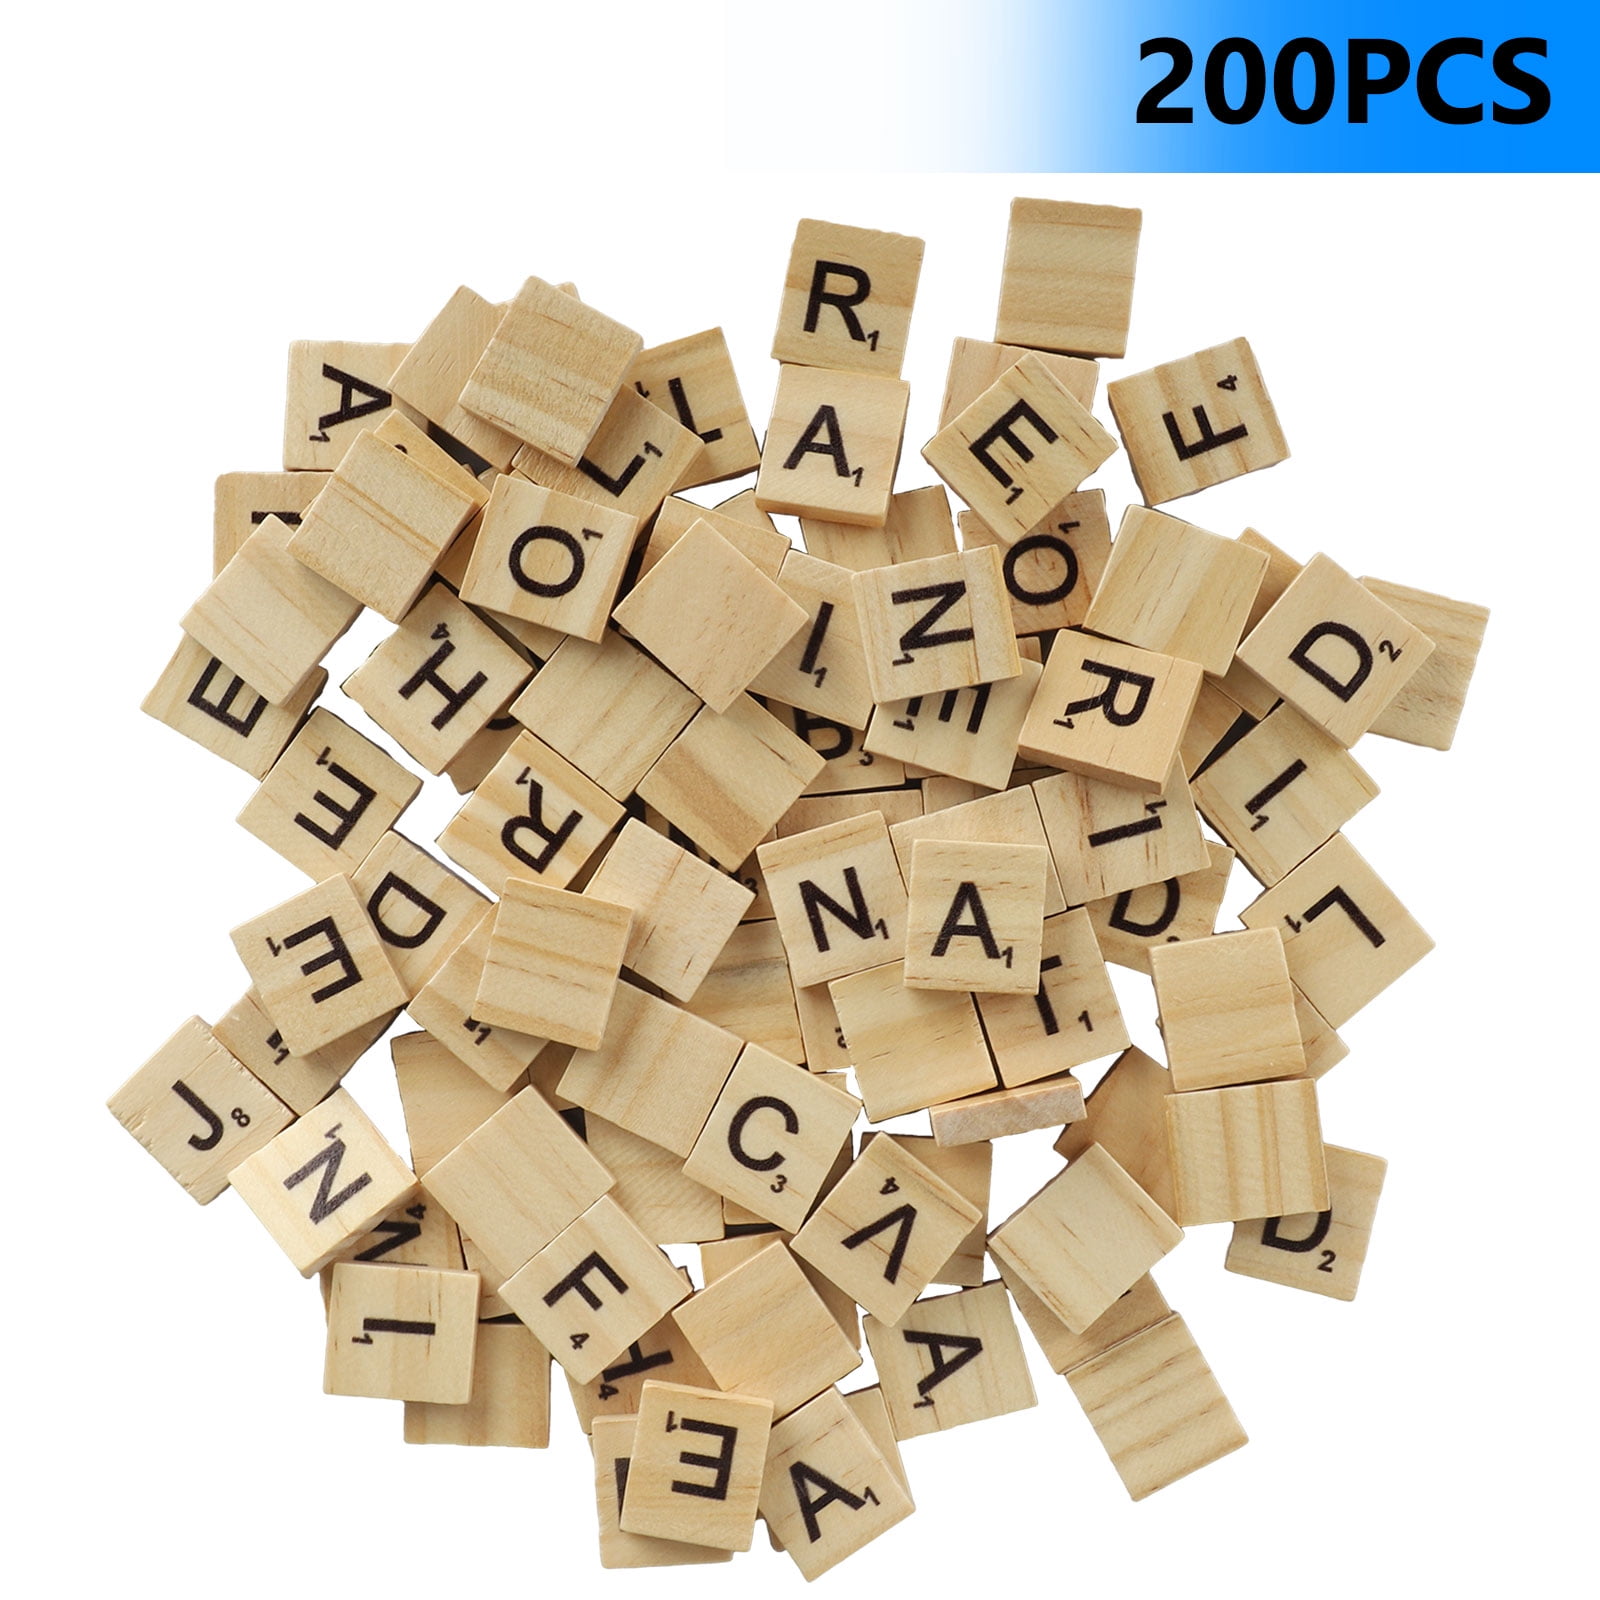 100 Wooden Alphabet Scrabble Tiles Black Letters & Numbers for Crafts Wood